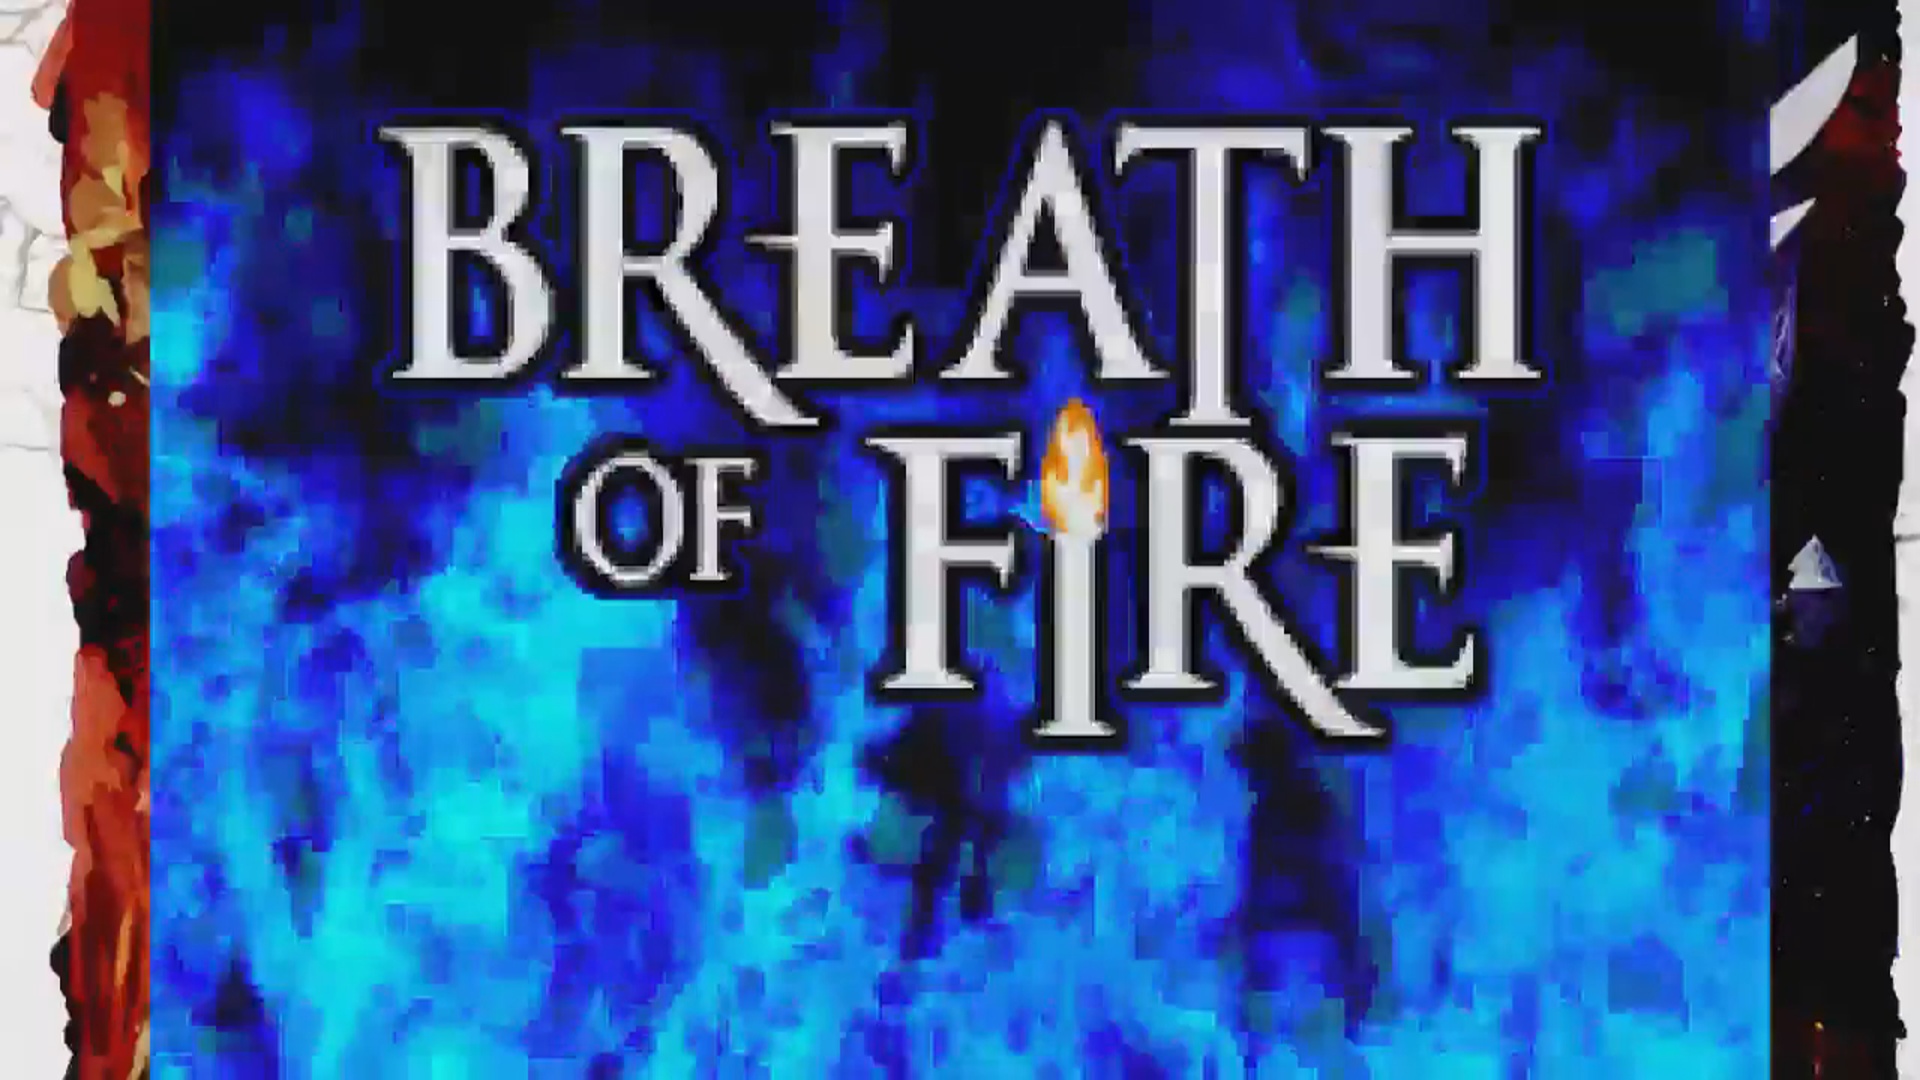 breath of fire improved part 13  conditions are a bit bleak